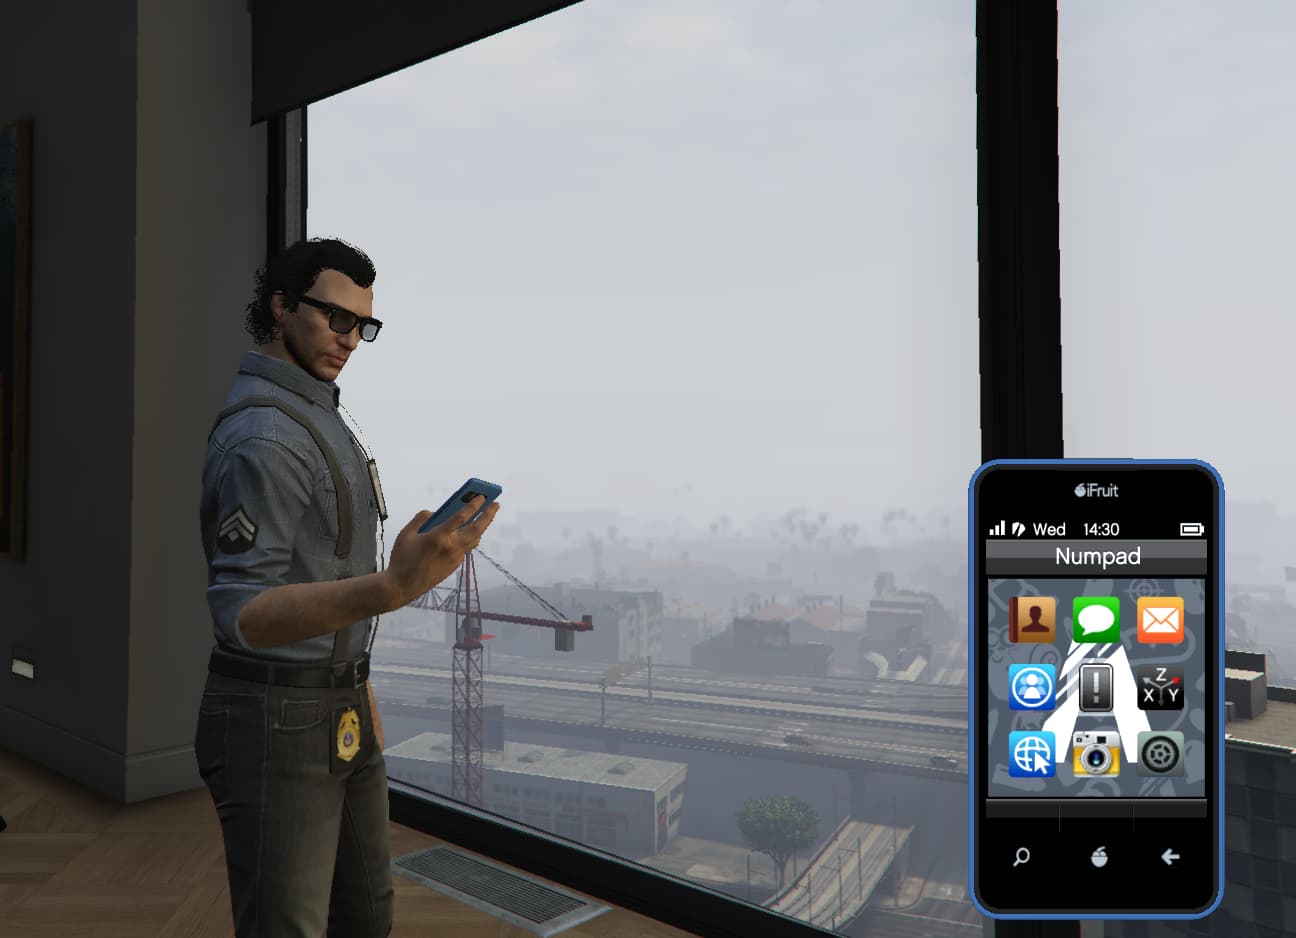 You can now turn your iPhone into the iFruit from GTA V